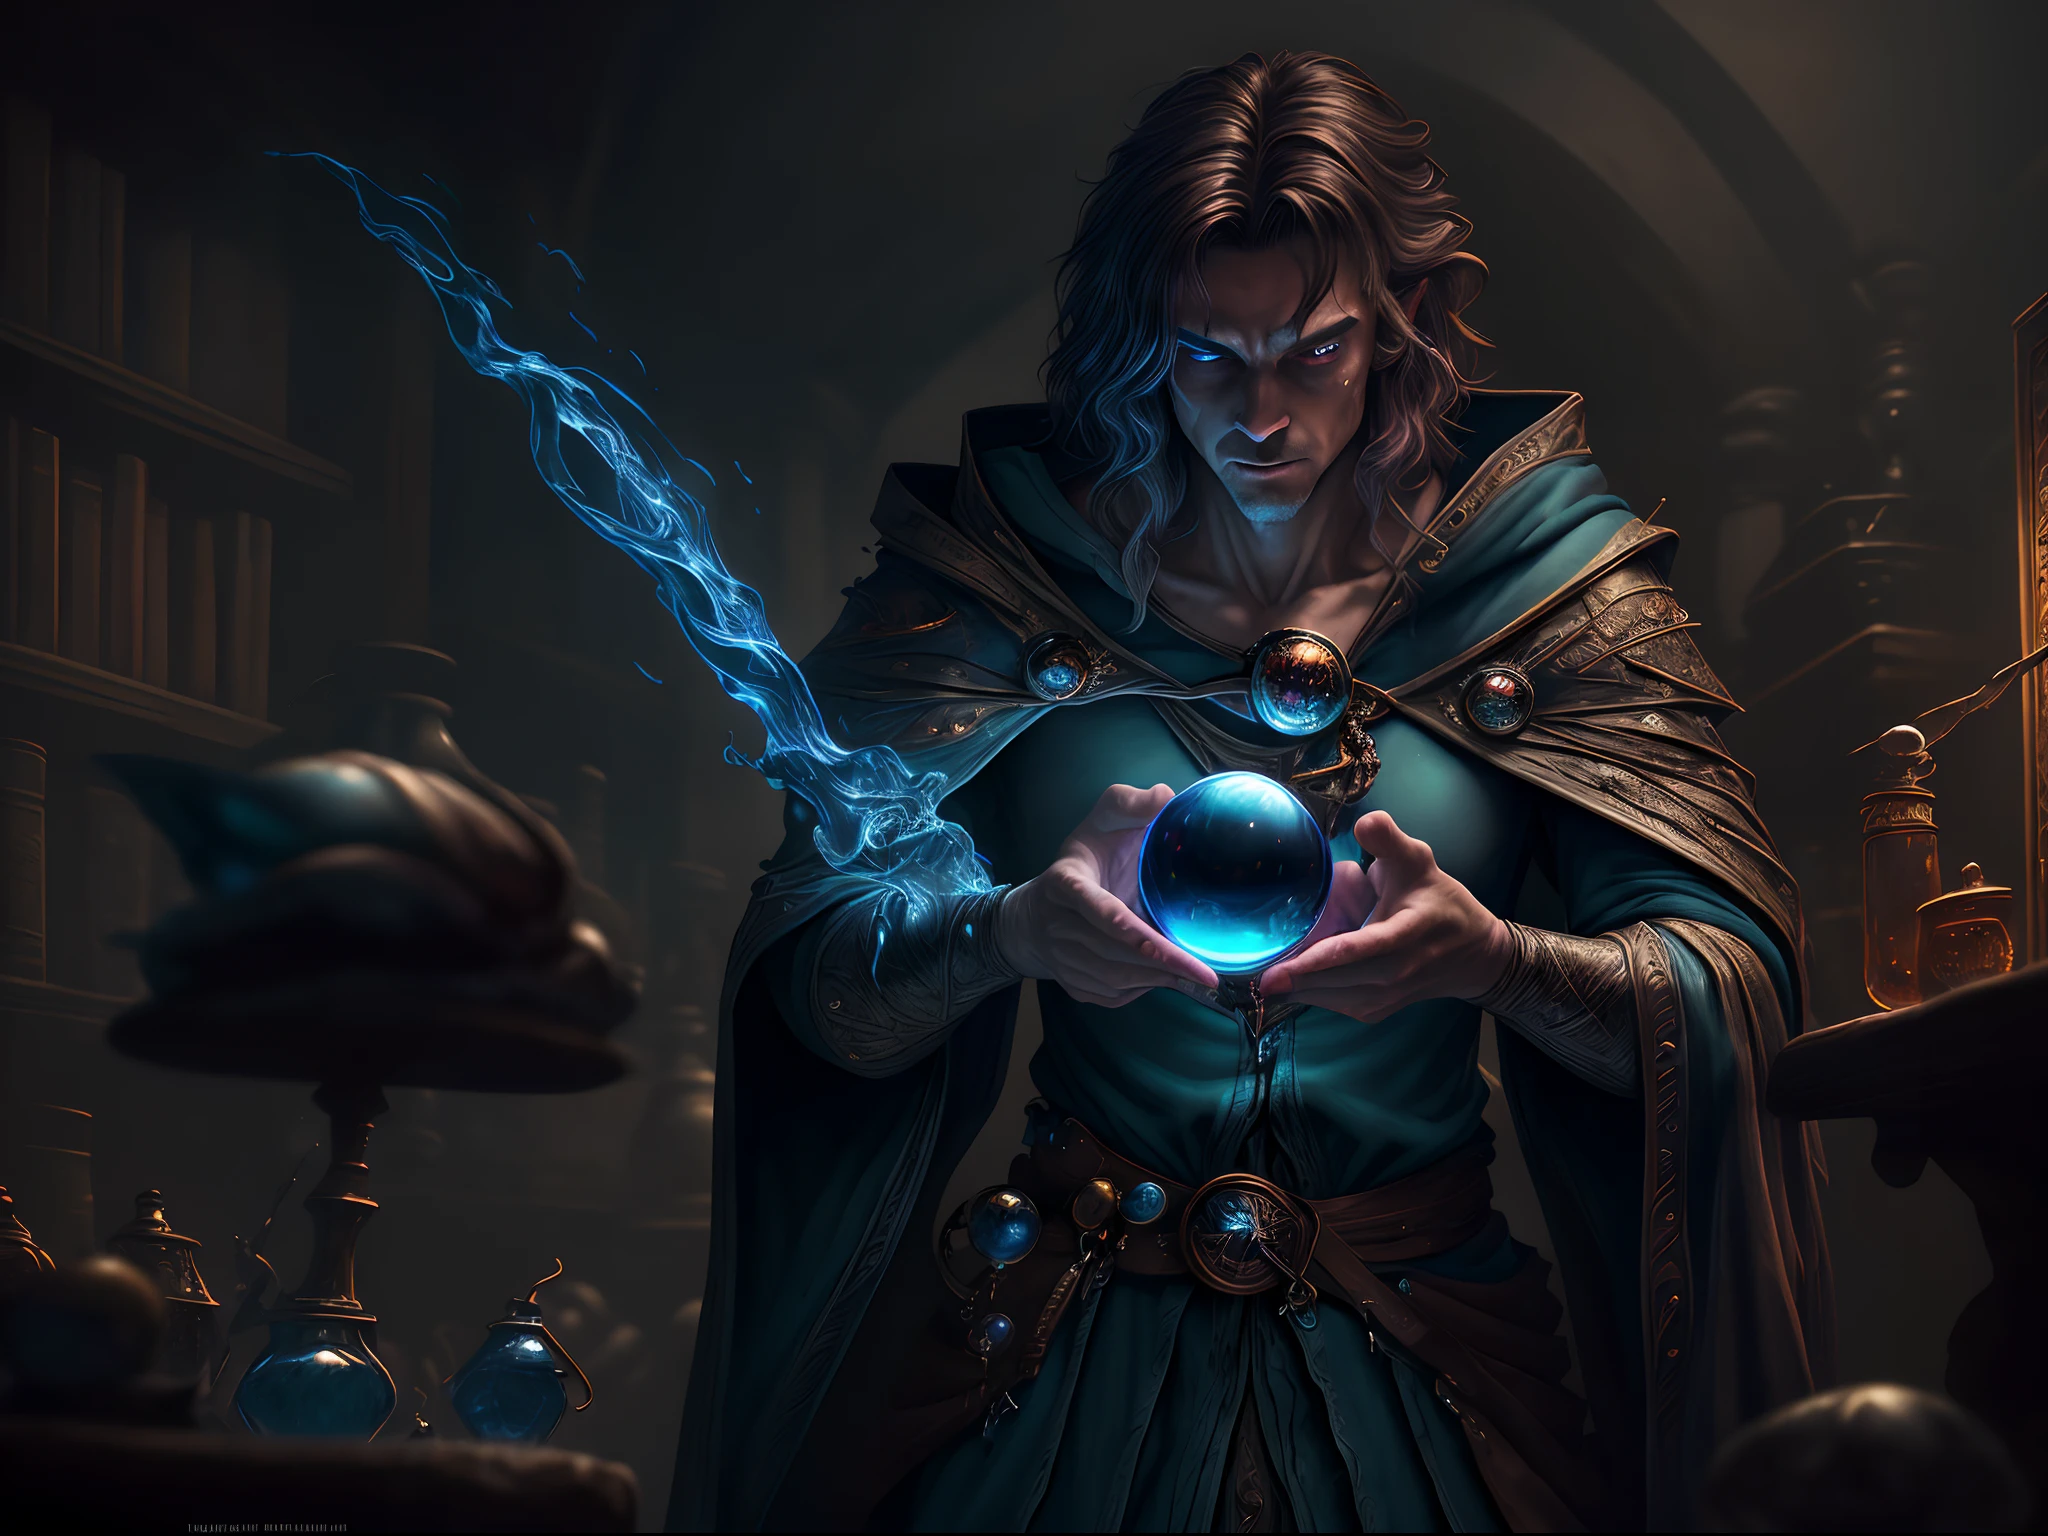 high details, best quality, 8k, [ultra detailed], masterpiece, best quality, (extremely detailed), dynamic angle, ultra wide shot, photorealistic, RAW, fantasy art, dnd art, fantasy art, realistic art, a wide angle view wallpaper of a wizard (intense details, Masterpiece, best quality: 1.5) looking into his crystal ball (intense details, Masterpiece, best quality: 1.5), casting a spell in his magical laboratory, human male wizard, fantasy wizard (intense details, Masterpiece, best quality: 1.5), D&D wizard, young human male (intense details, Masterpiece, best quality: 1.5), [[anatomically correct]], dynamic hair, dynamic eyes, wearing magical robe (intense details, Masterpiece, best quality: 1.5), dynamic colors, ultra detailed face (intense details, Masterpiece, best quality: 1.5), manipulating blue magical energy, in his laboratory (intense details, Masterpiece, best quality: 1.5), many magical tomes, magical library (intense details, Masterpiece, best quality: 1.5),  many magical vials, ultra wide angle from a medium distance,